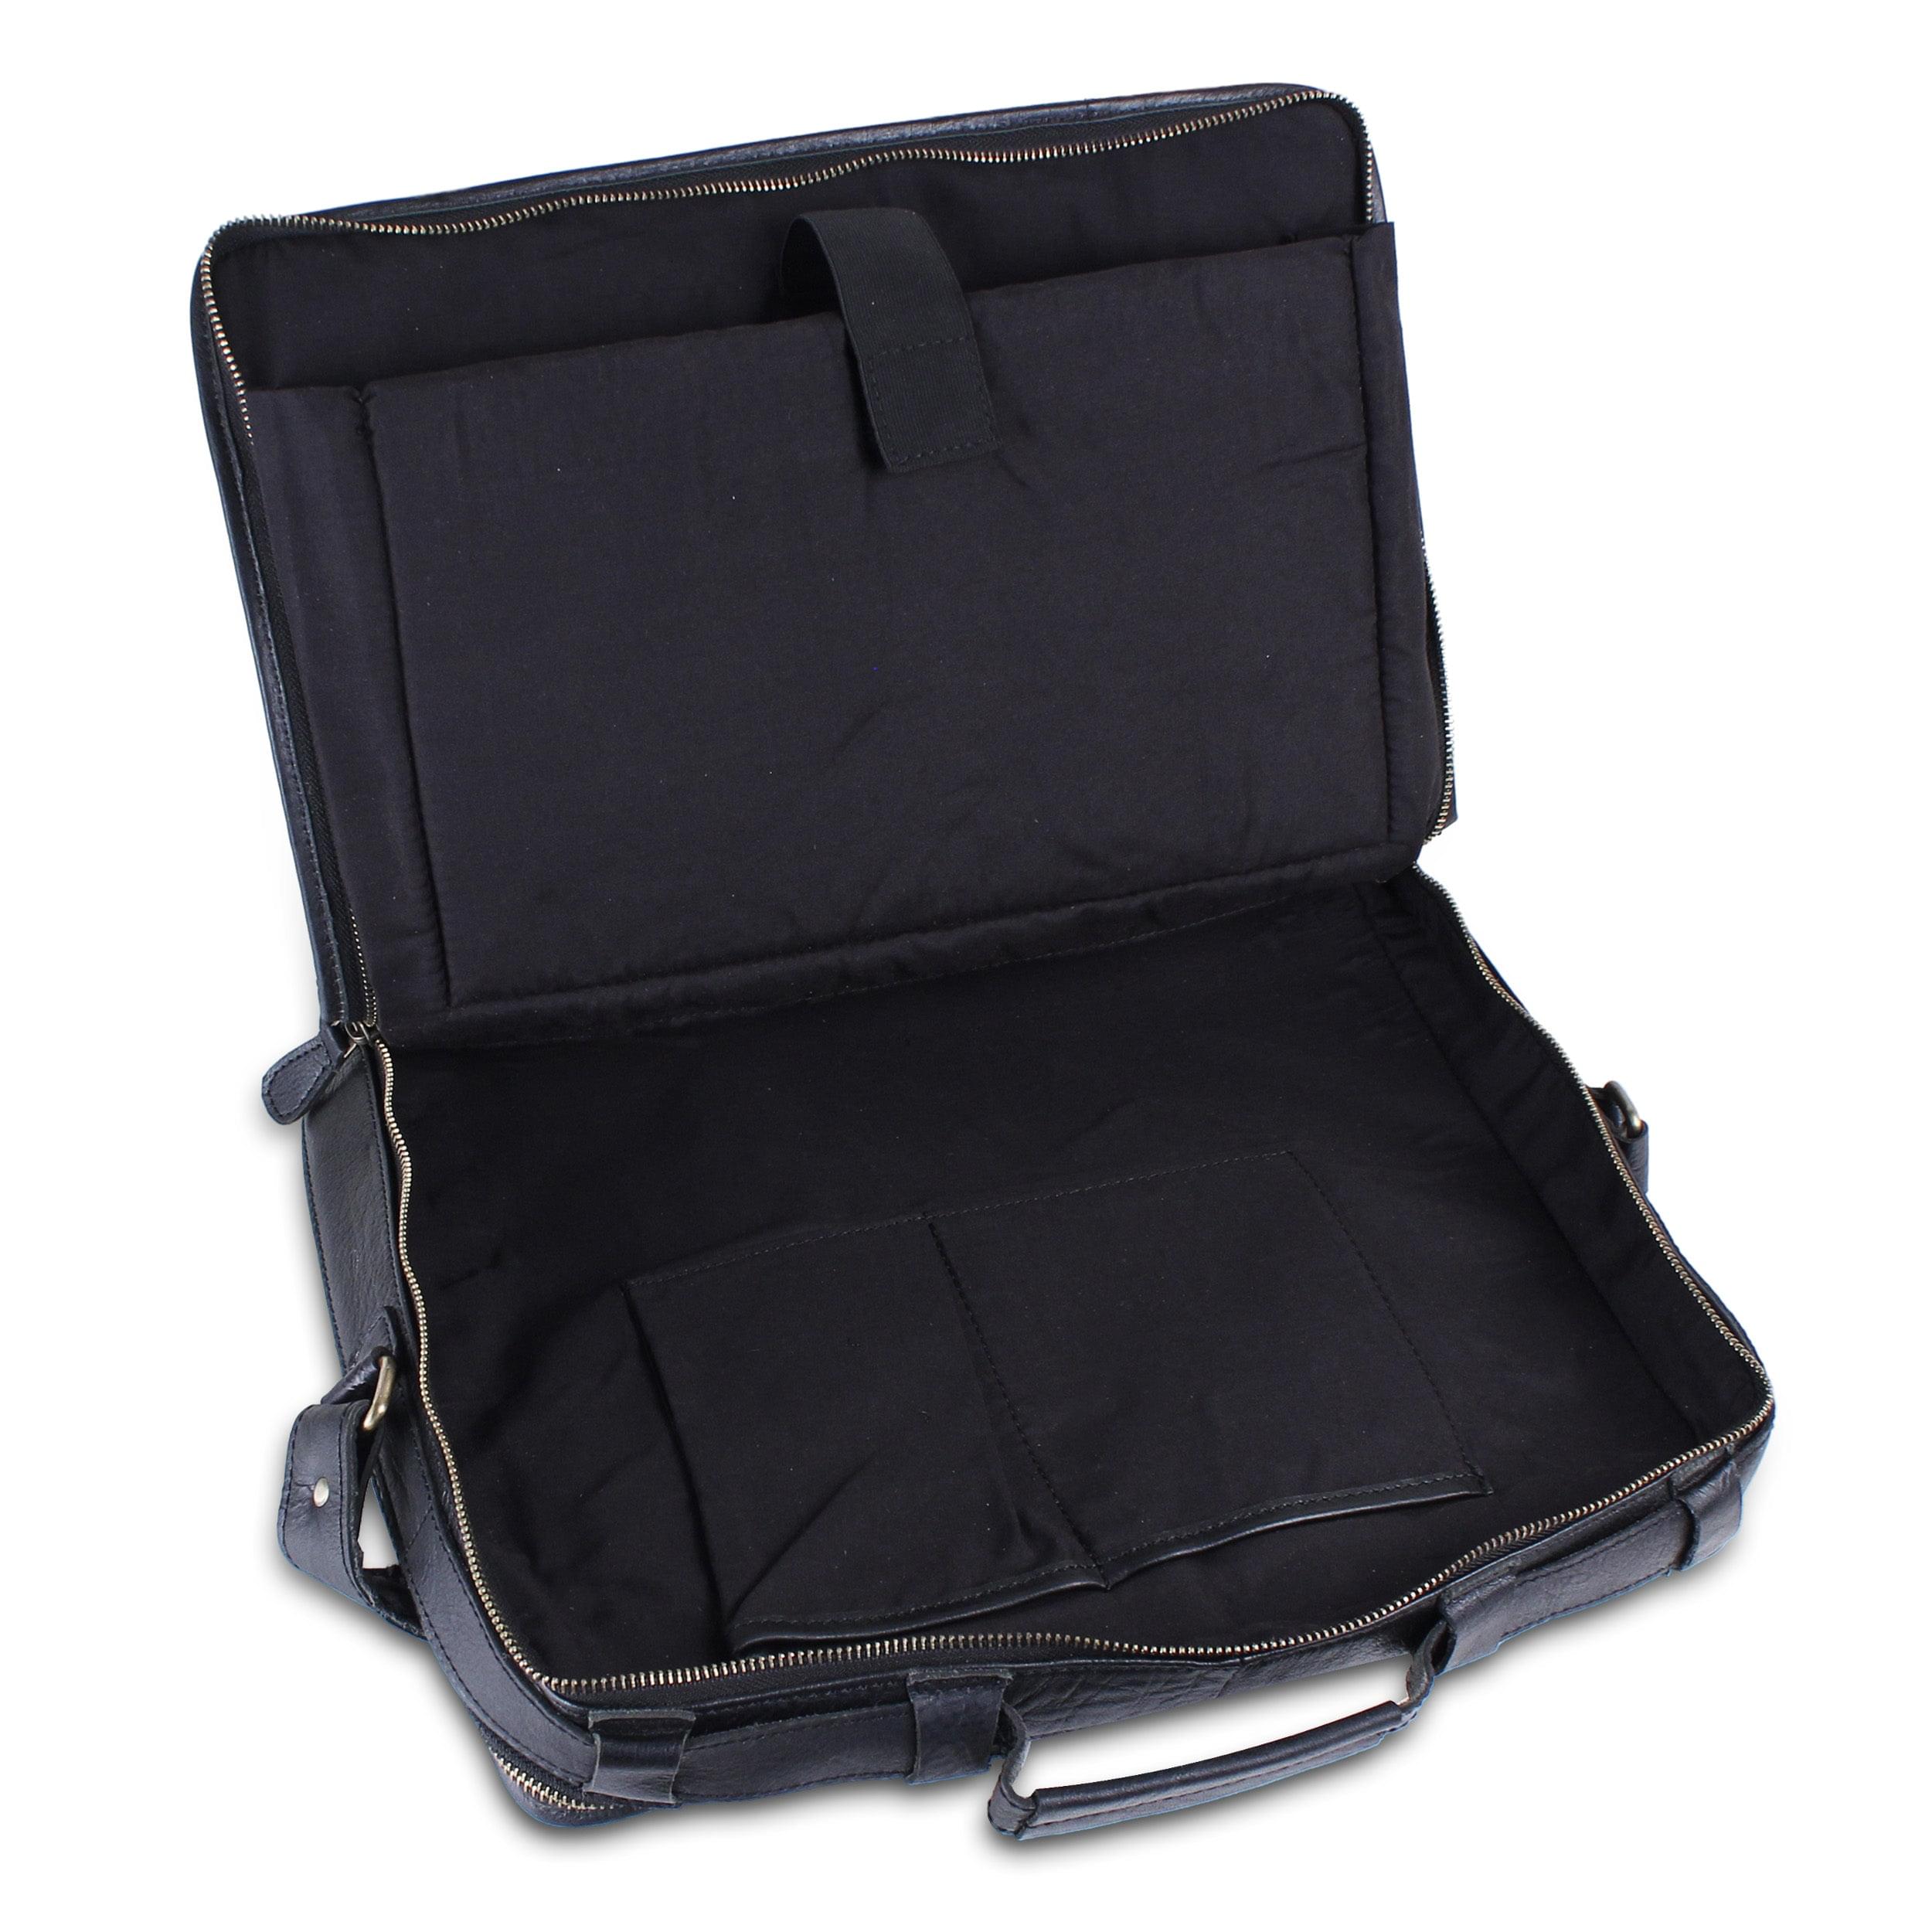 Genuine Leather Padded Black Briefcase Laptop Case- 15 Inch